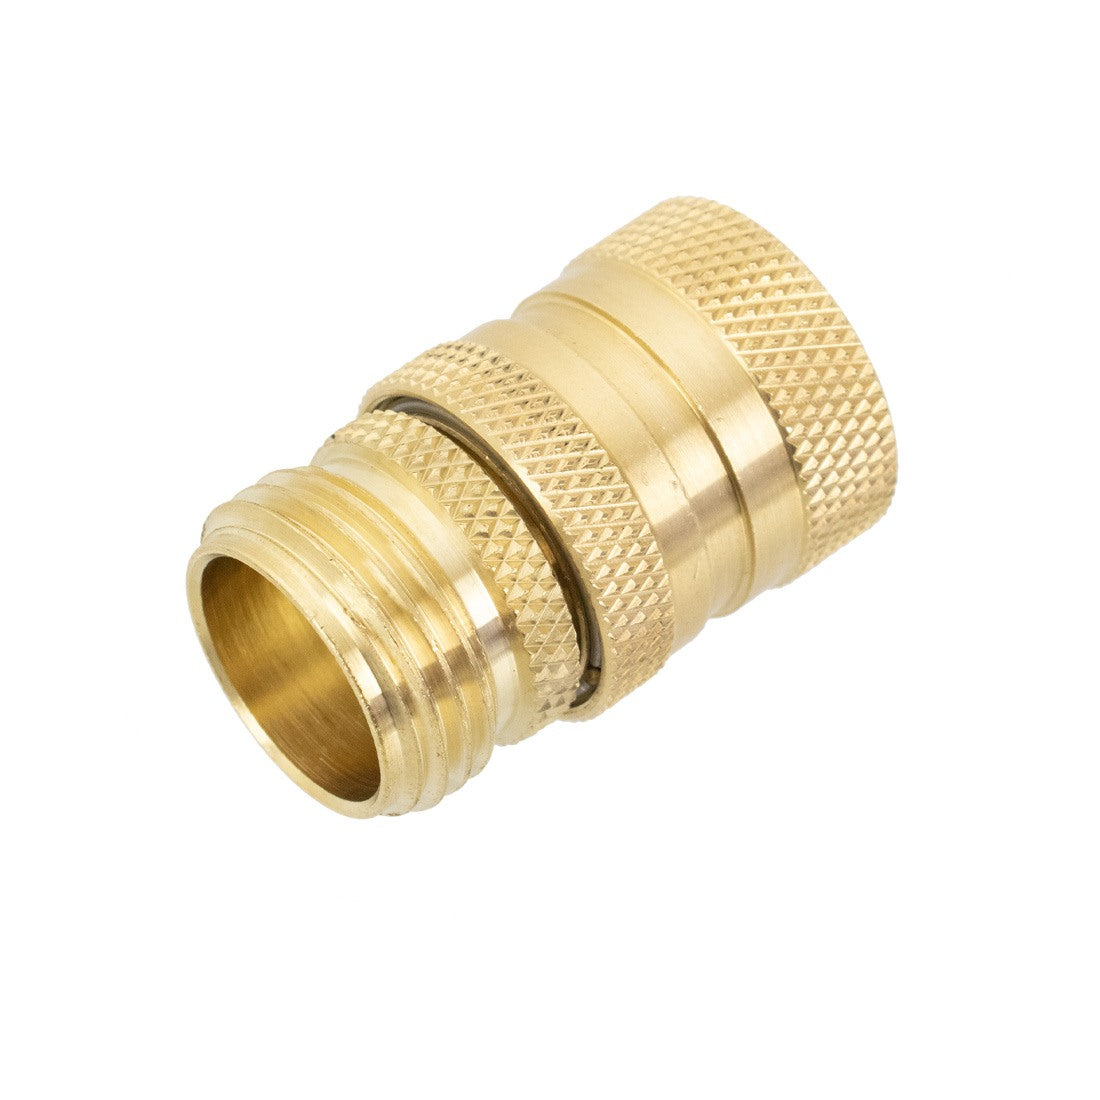 PWP Garden Hose Quick Connect Male and Female Set Brass Top View